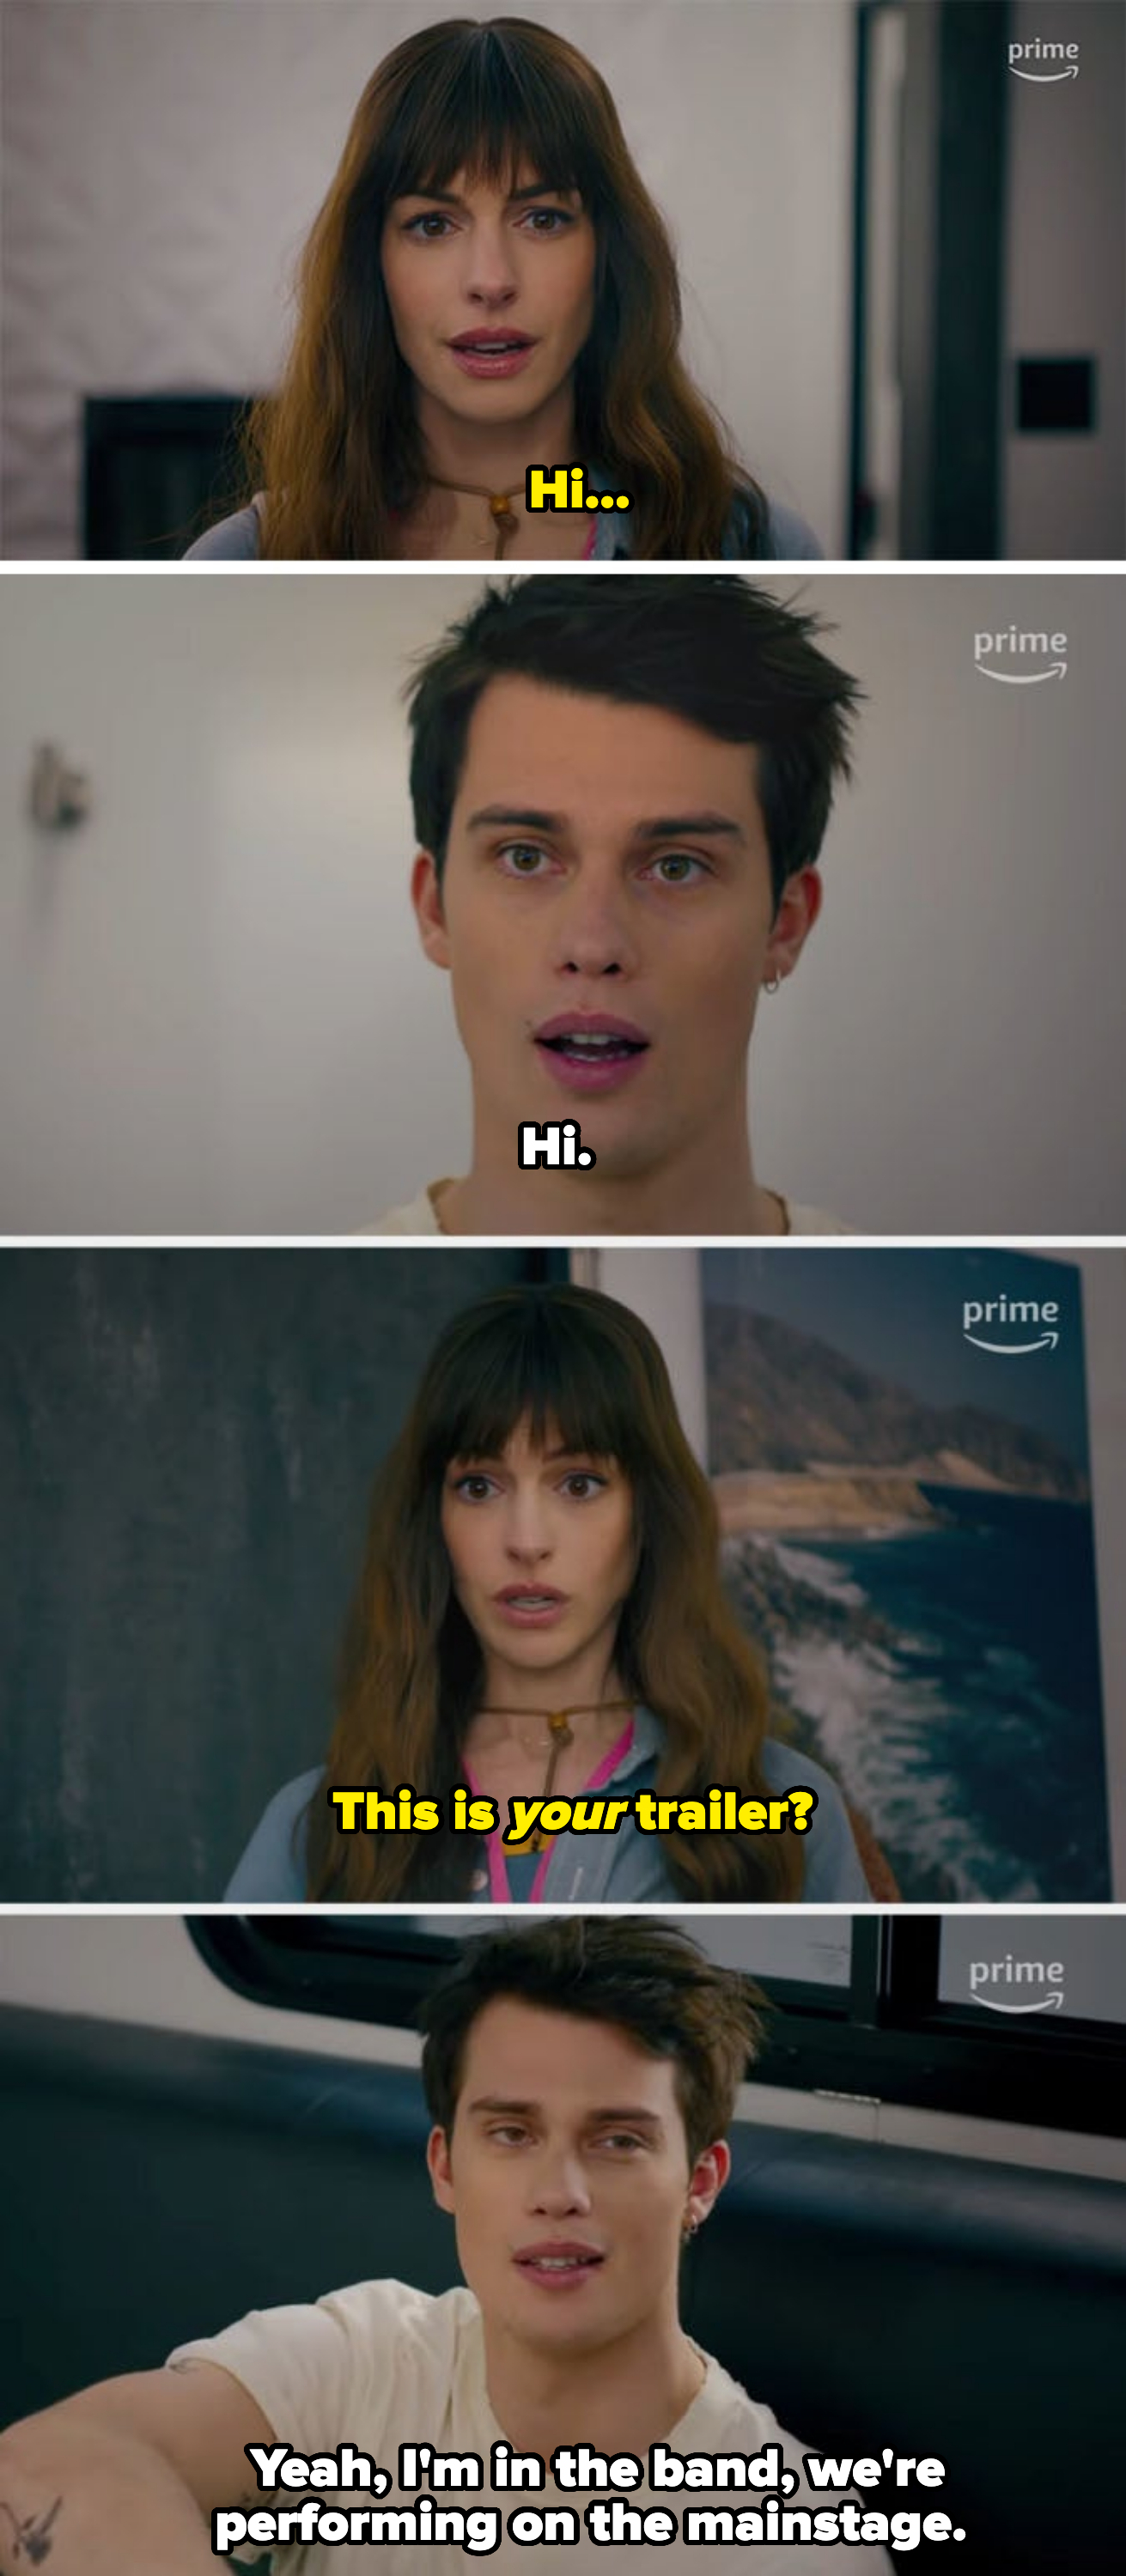 Hayes tells Solène that he&#x27;s a part of a band when she walks into his trailer